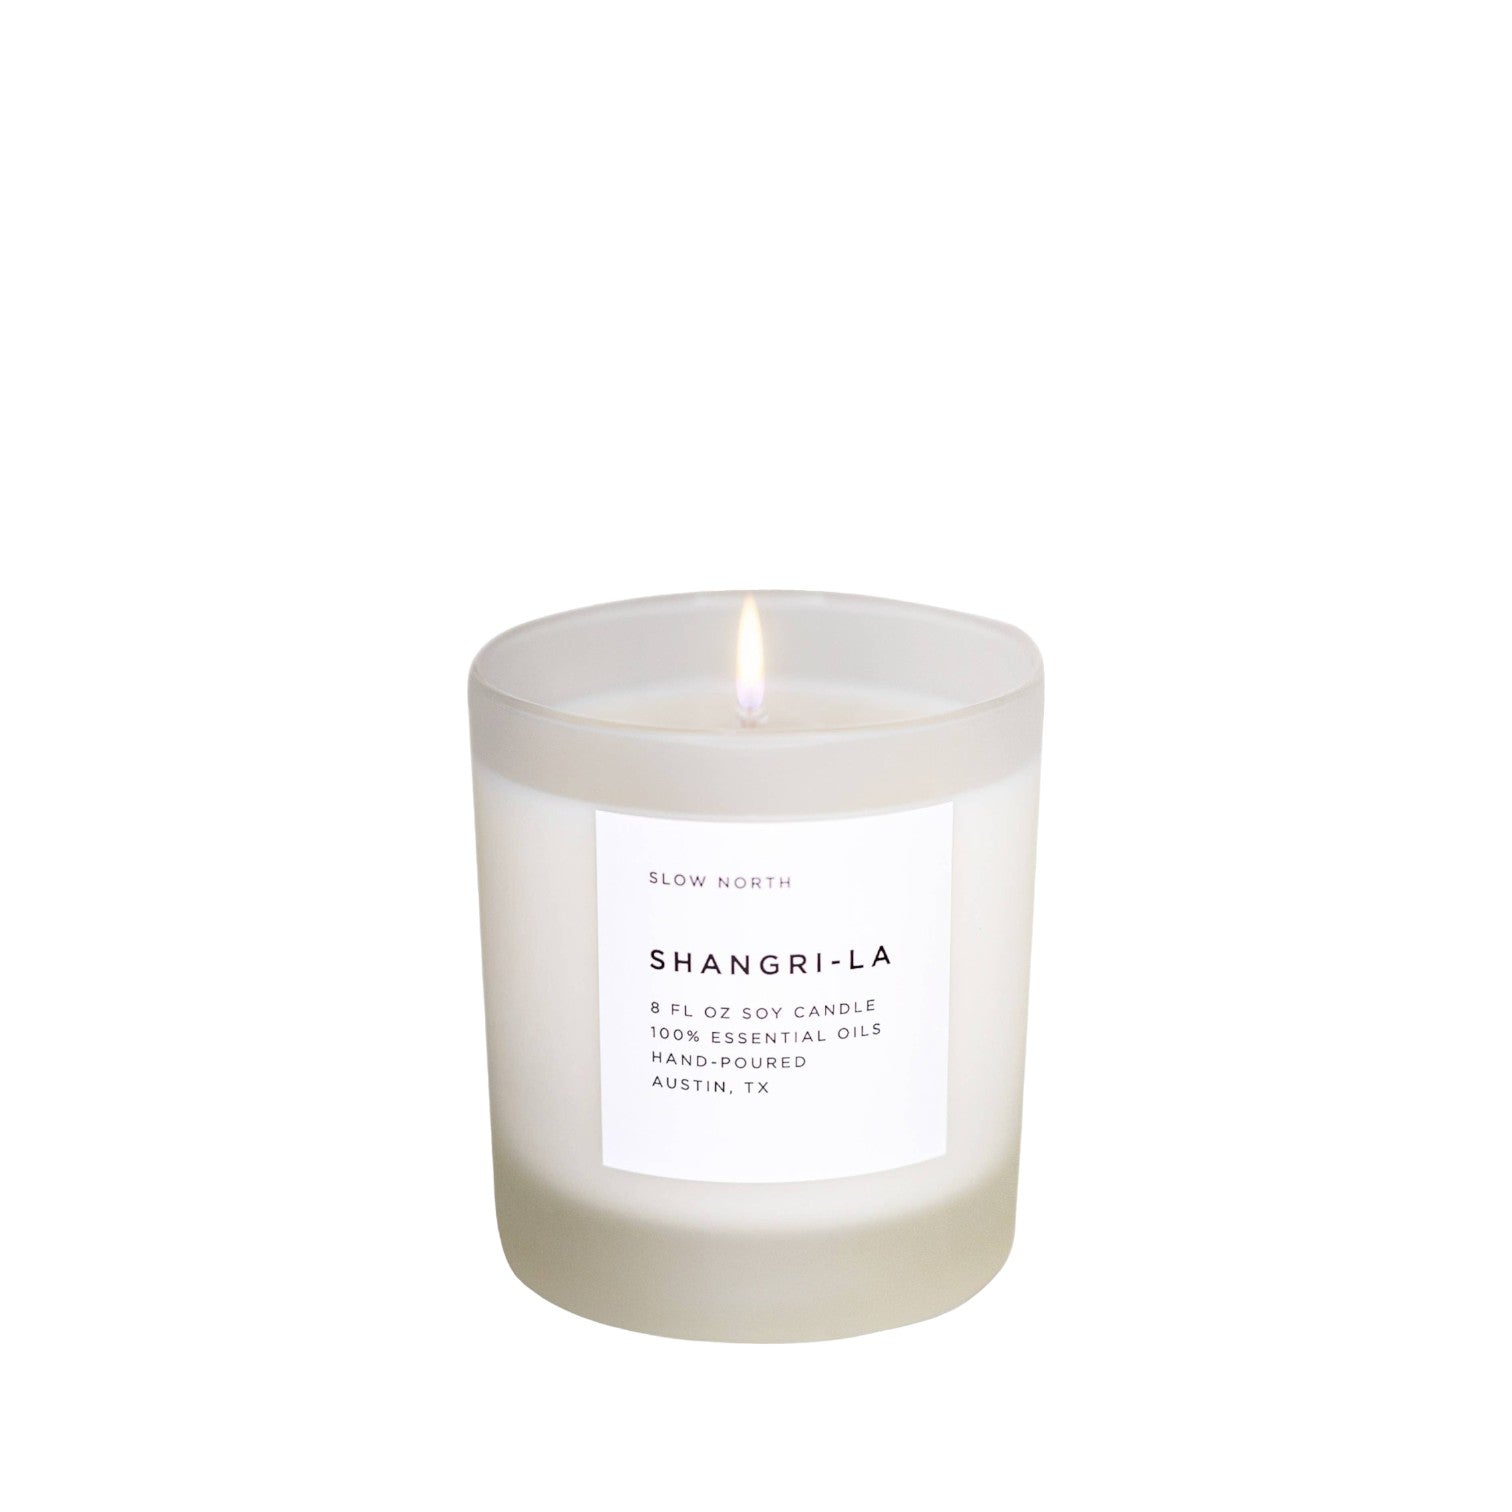 Shangri-la scented soy candle on a white background